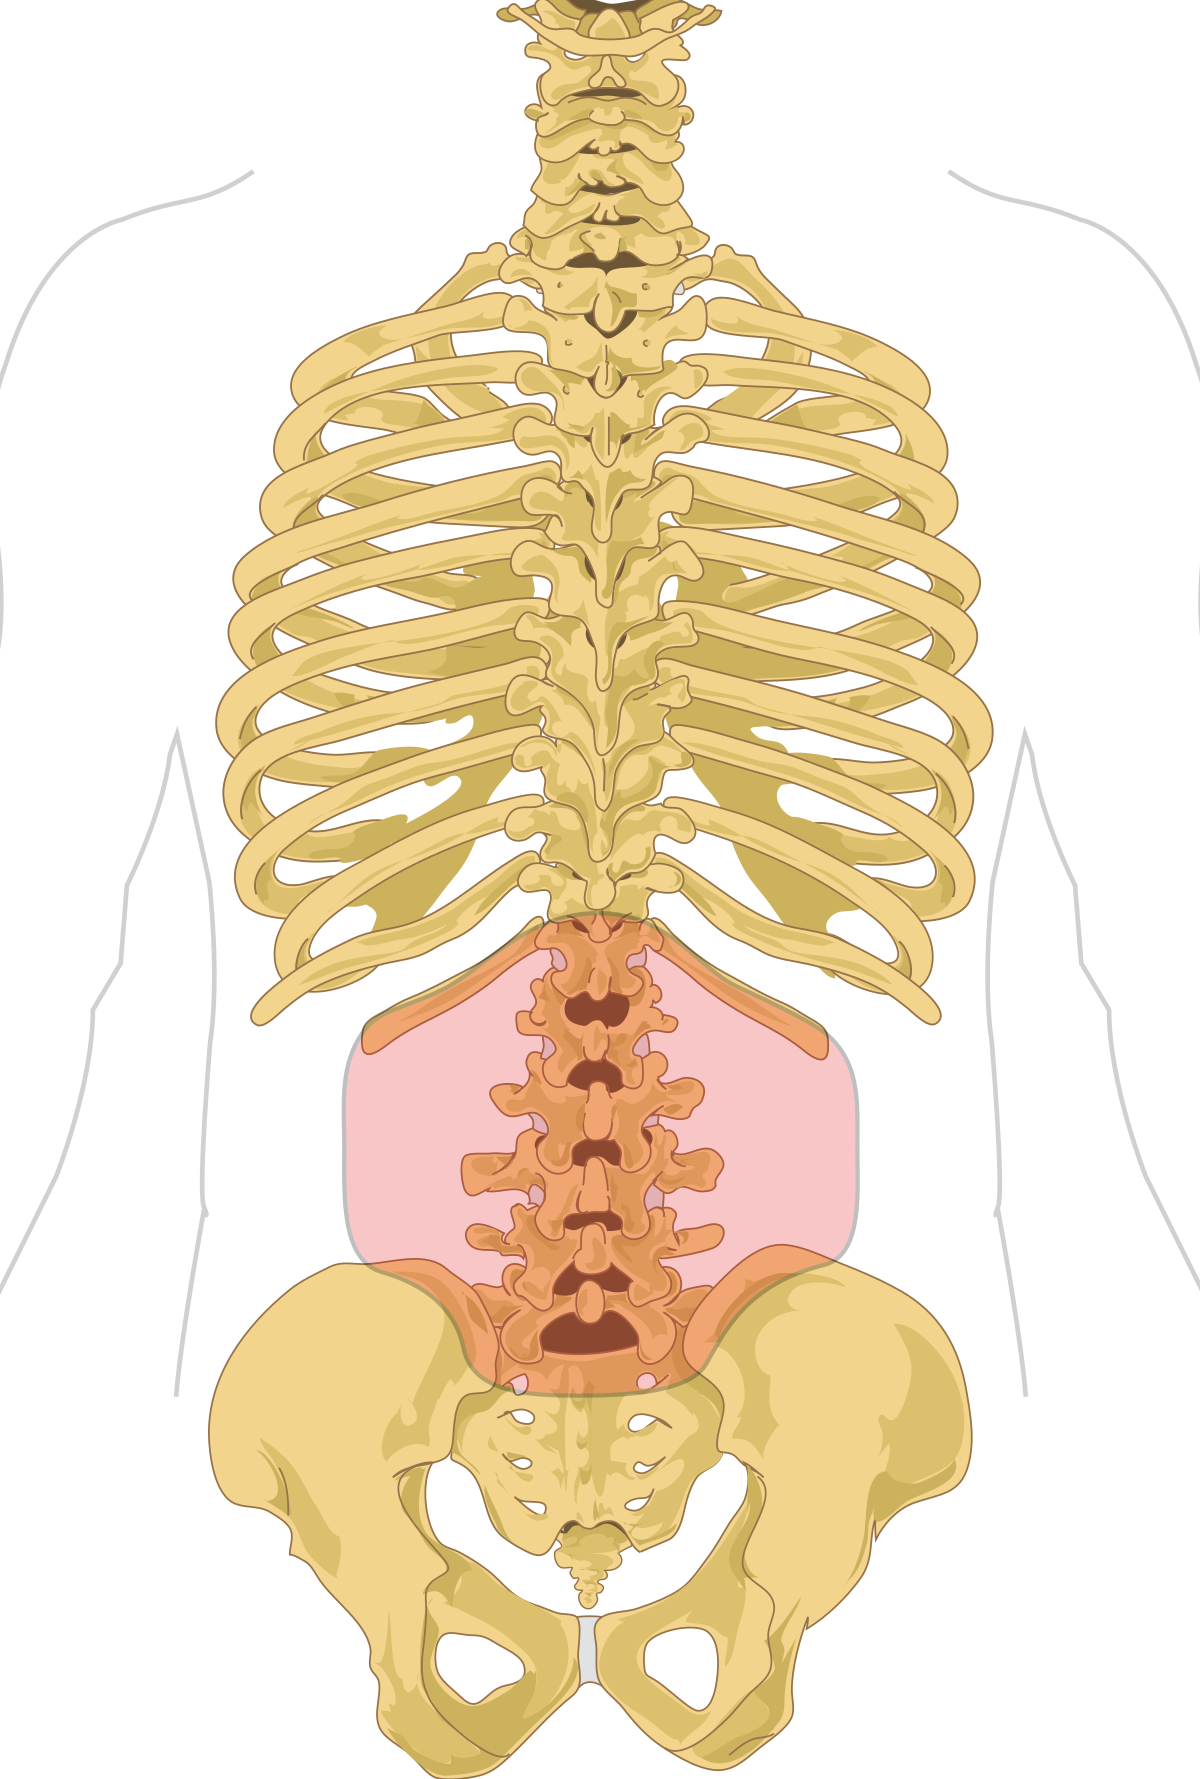 <p>superior; Referring to the lower back, particularly the region of the spine between the thoracic (chest) and sacral (pelvic) regions.</p>